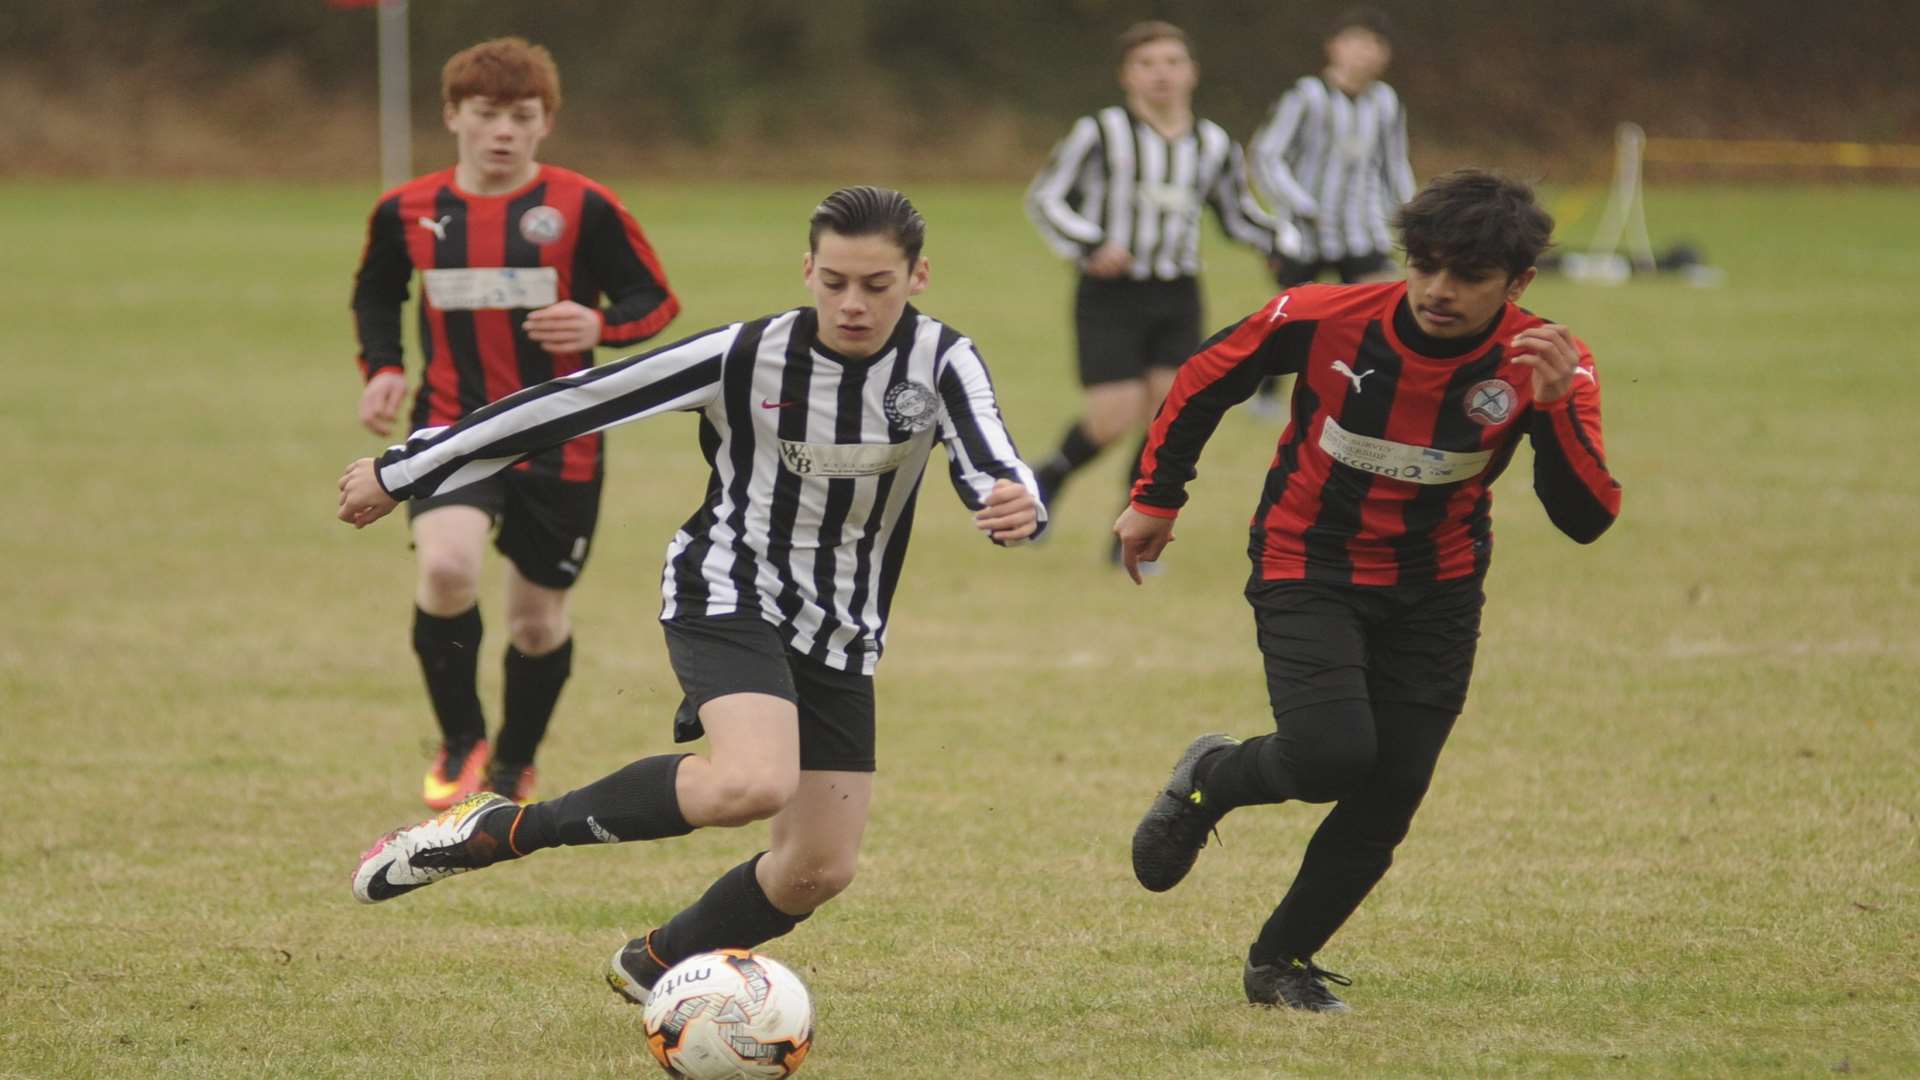 Real 60 and Meopham Colts Red do battle in Under-15 Division 2 Picture: Steve Crispe